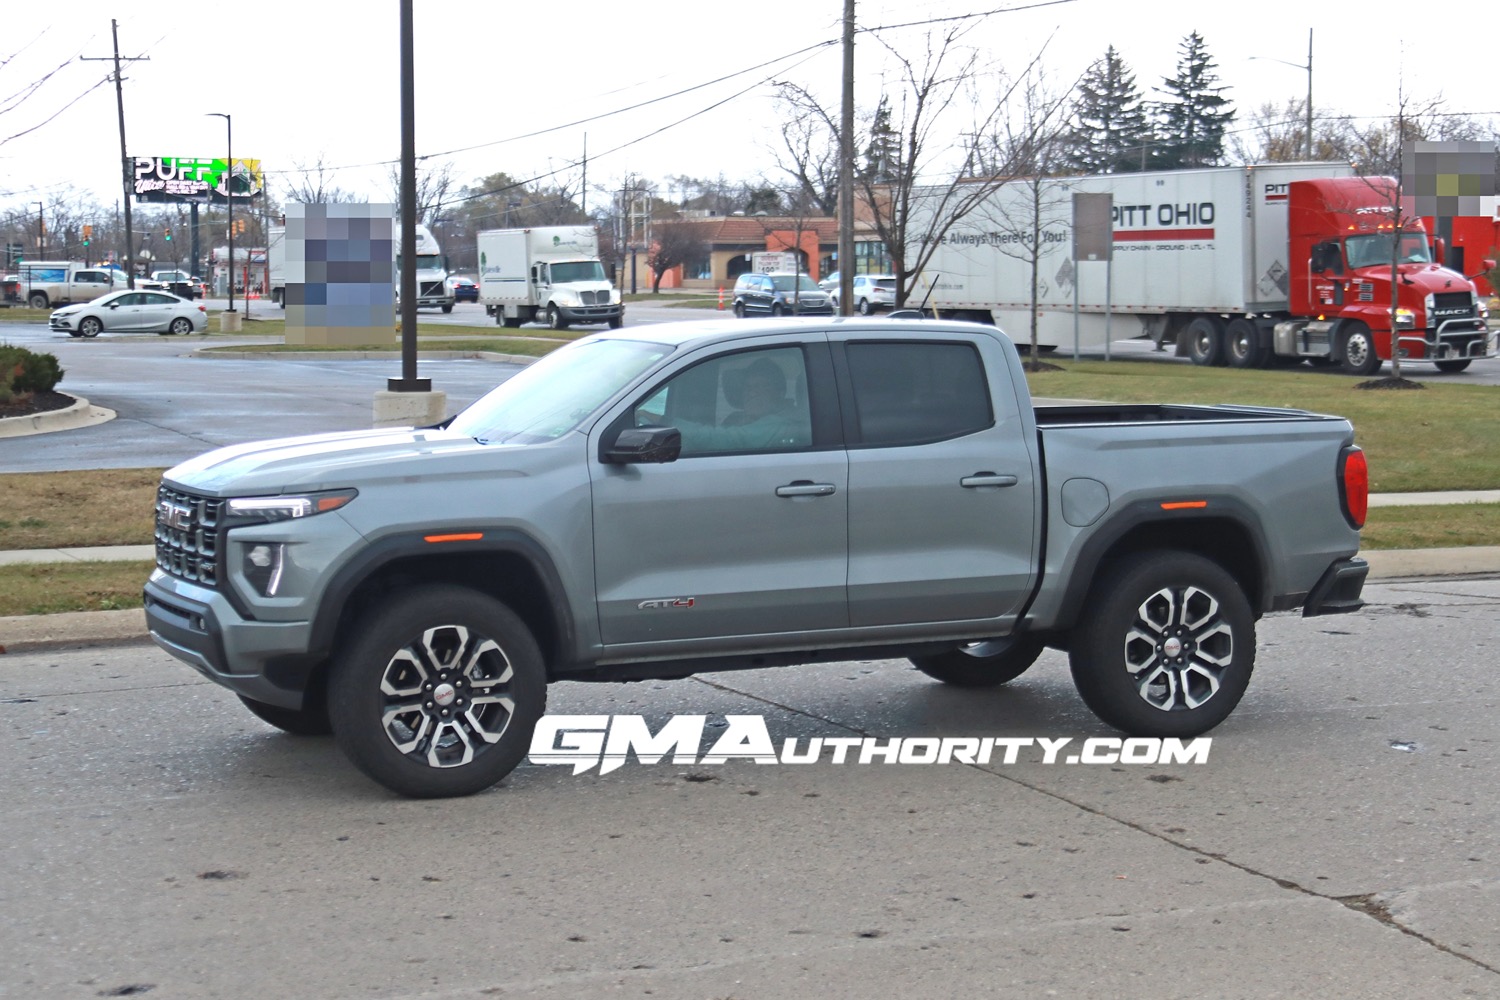 2023-gmc-canyon-at4-sterling-metallic-gxd-20-inch-wheels-rd5-real-world-photos-exterior3-chevrolet-colorado-trail-boss-sterling-gray-metallic-gxd-first-real-world-photos-exterior-004